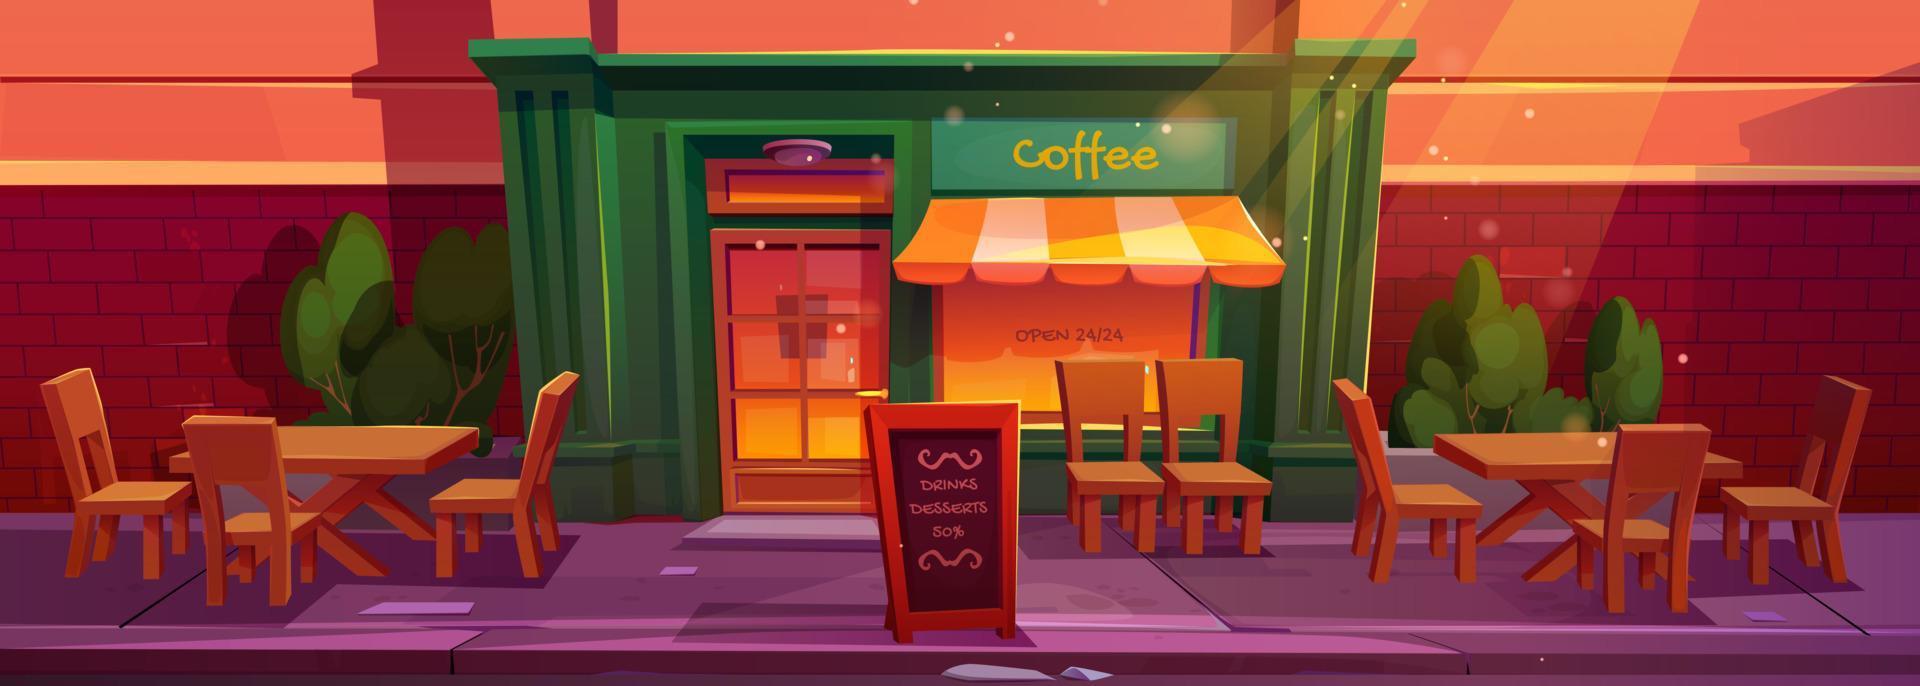 Cafe exterior with table and chair outside cartoon vector